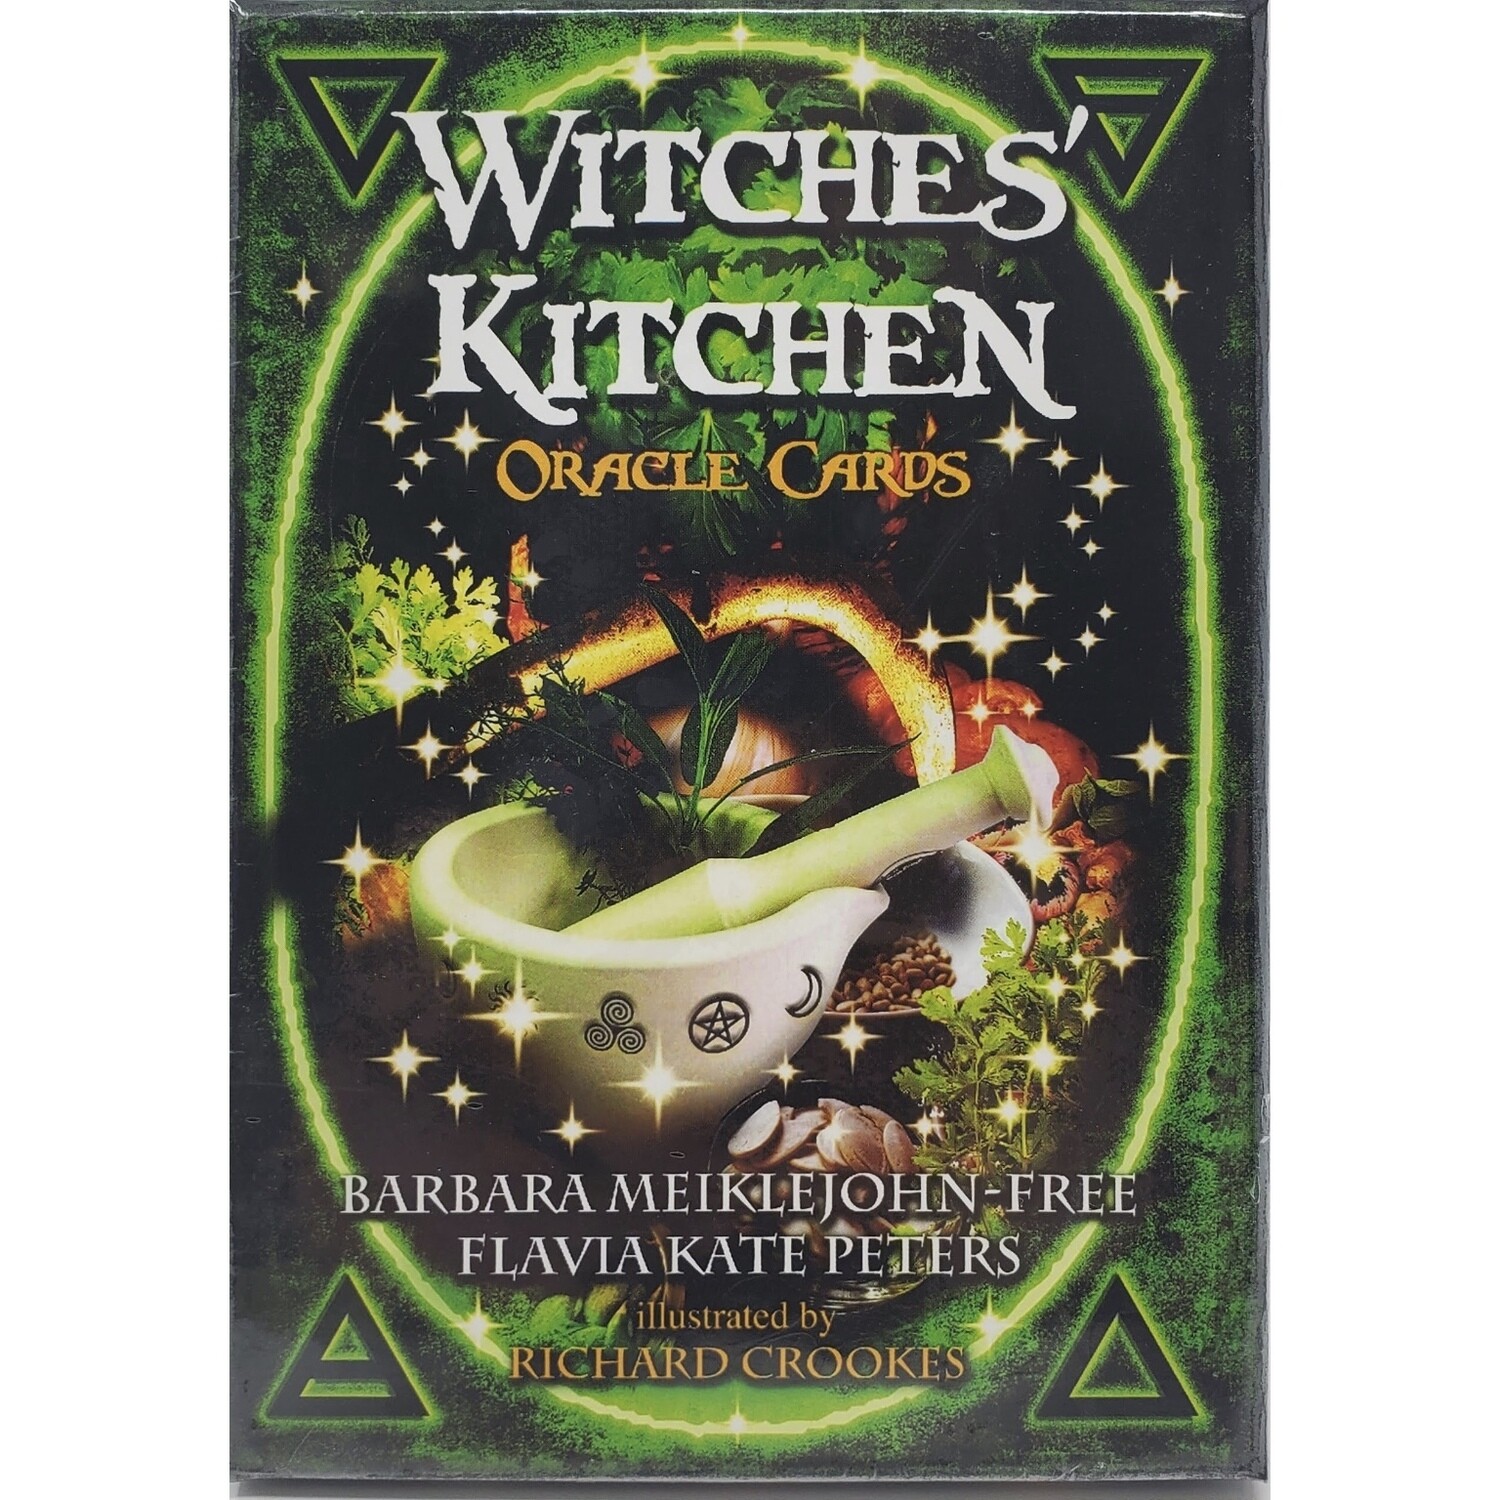 WITCHES' KITCHEN ORACLE